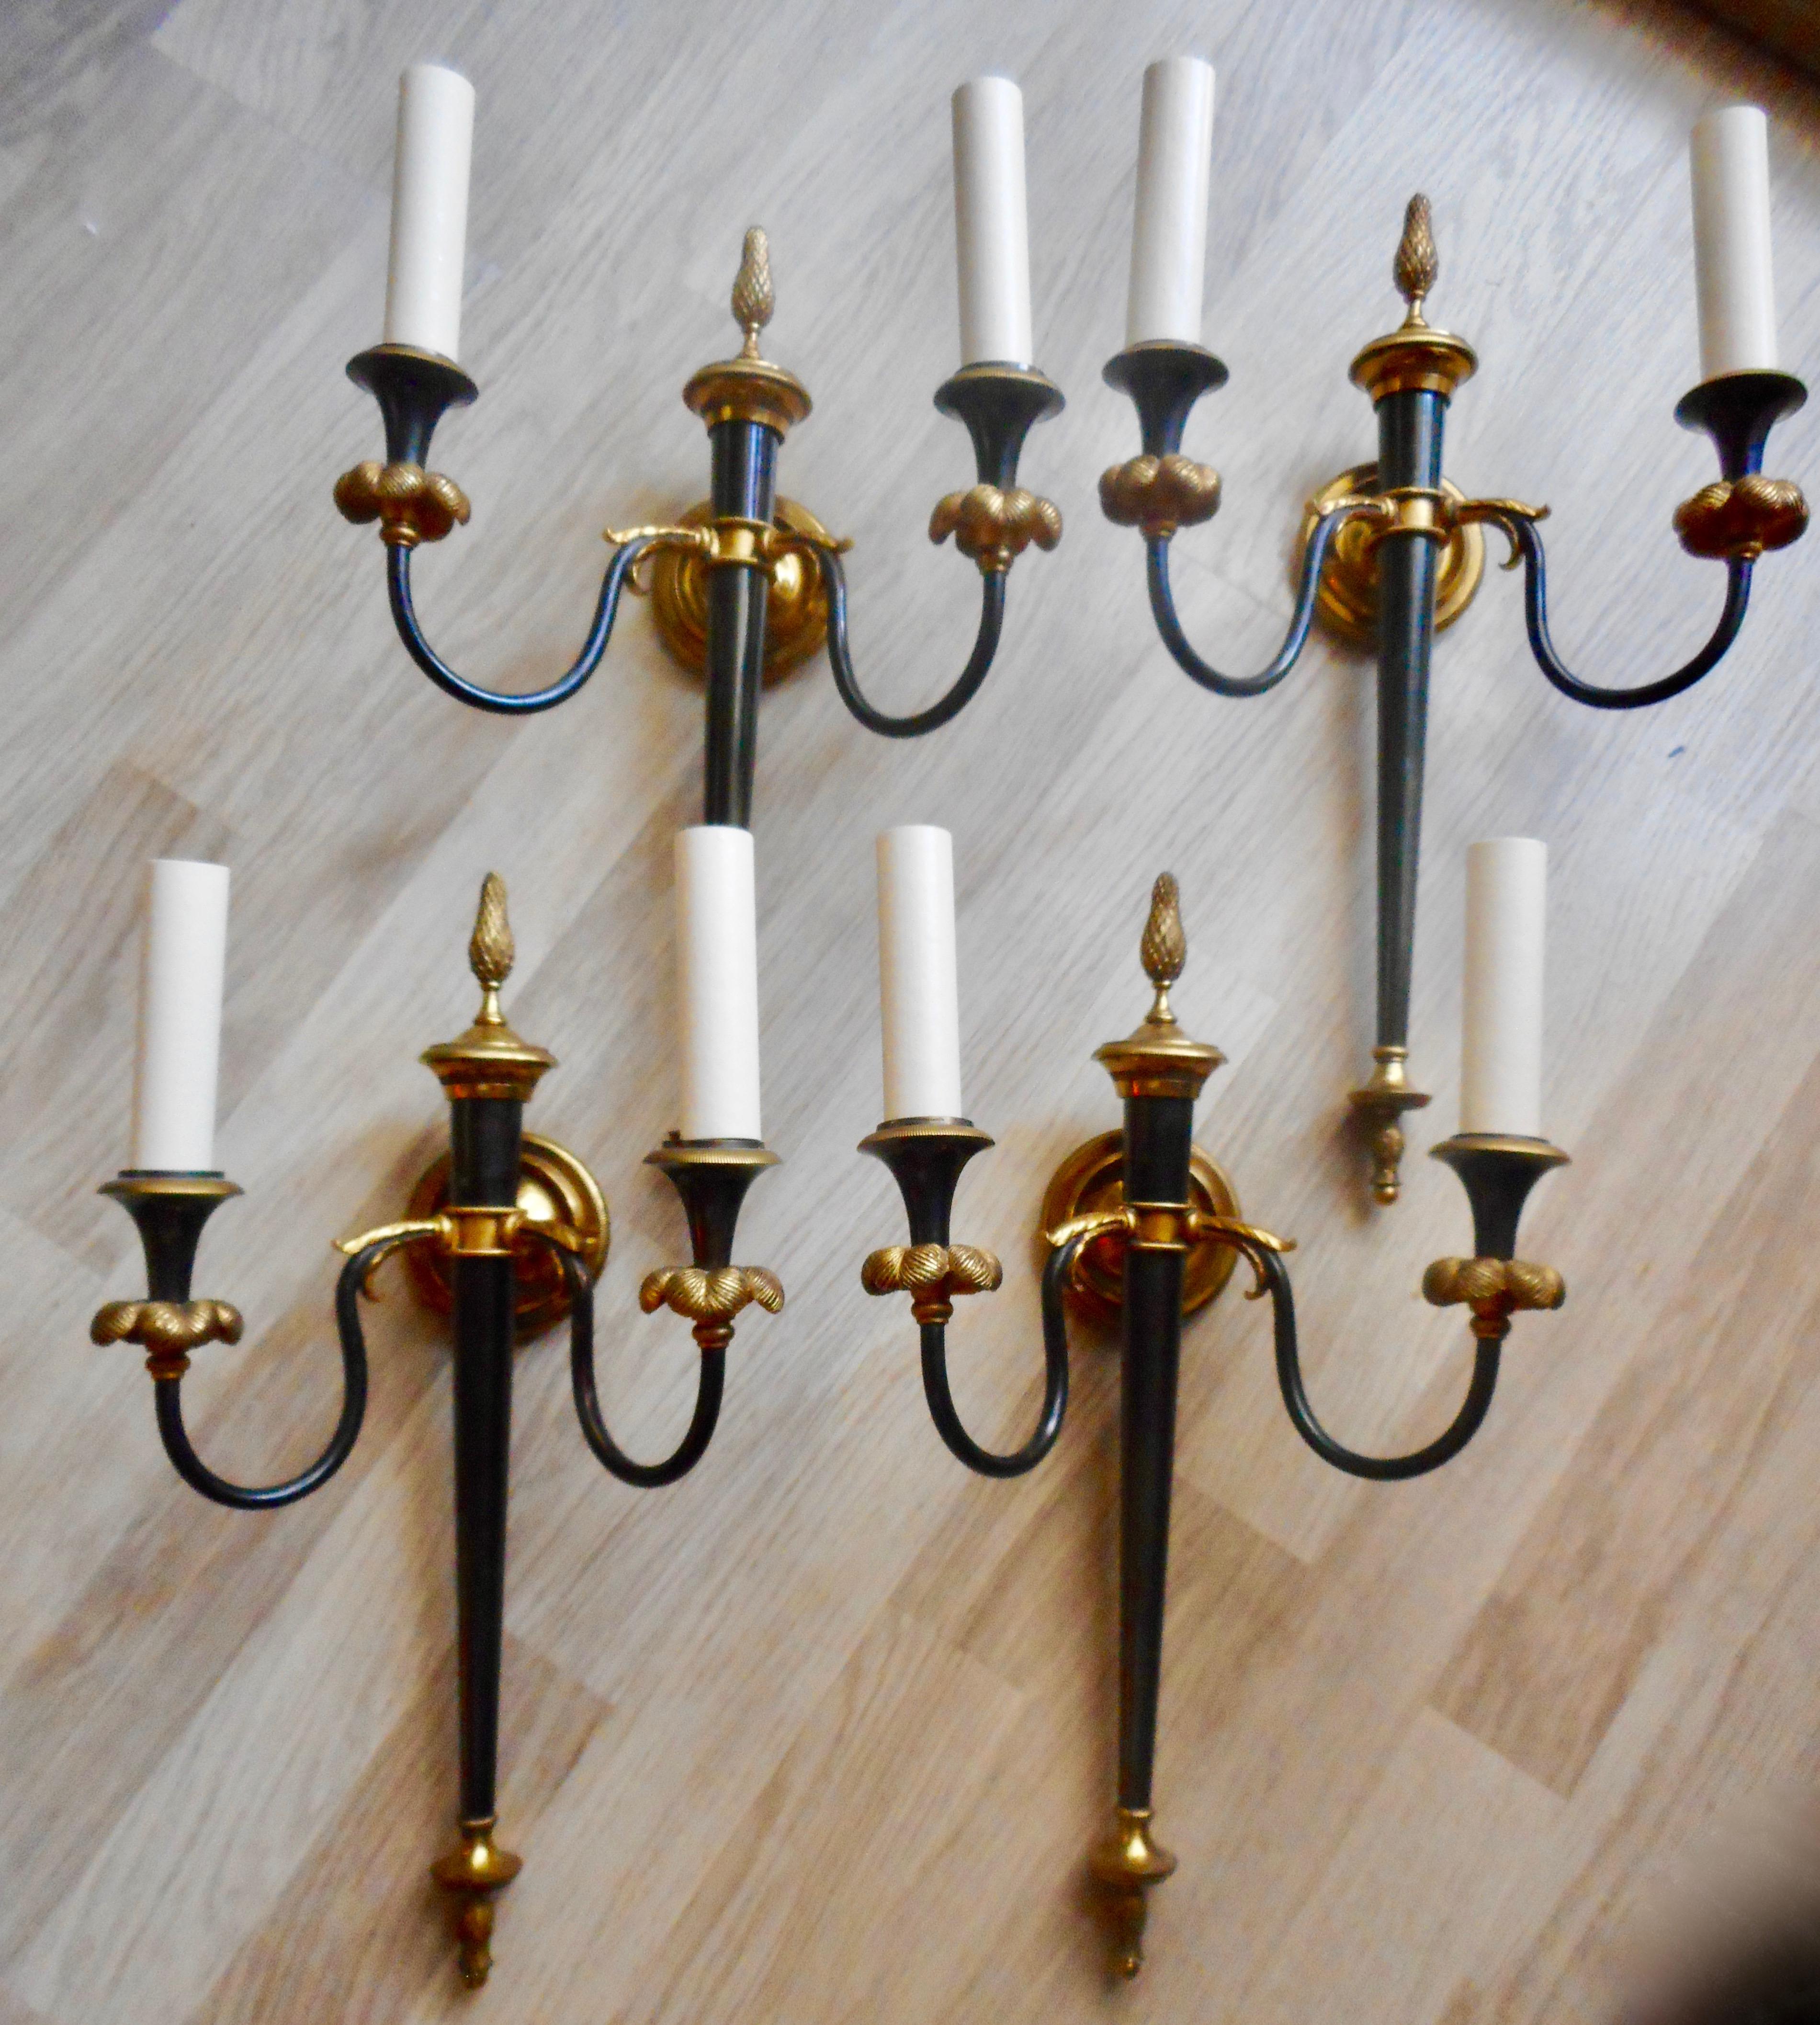 Elegant Set of Four Neoclassical Wall Sconces by Maison Jansen, France 1